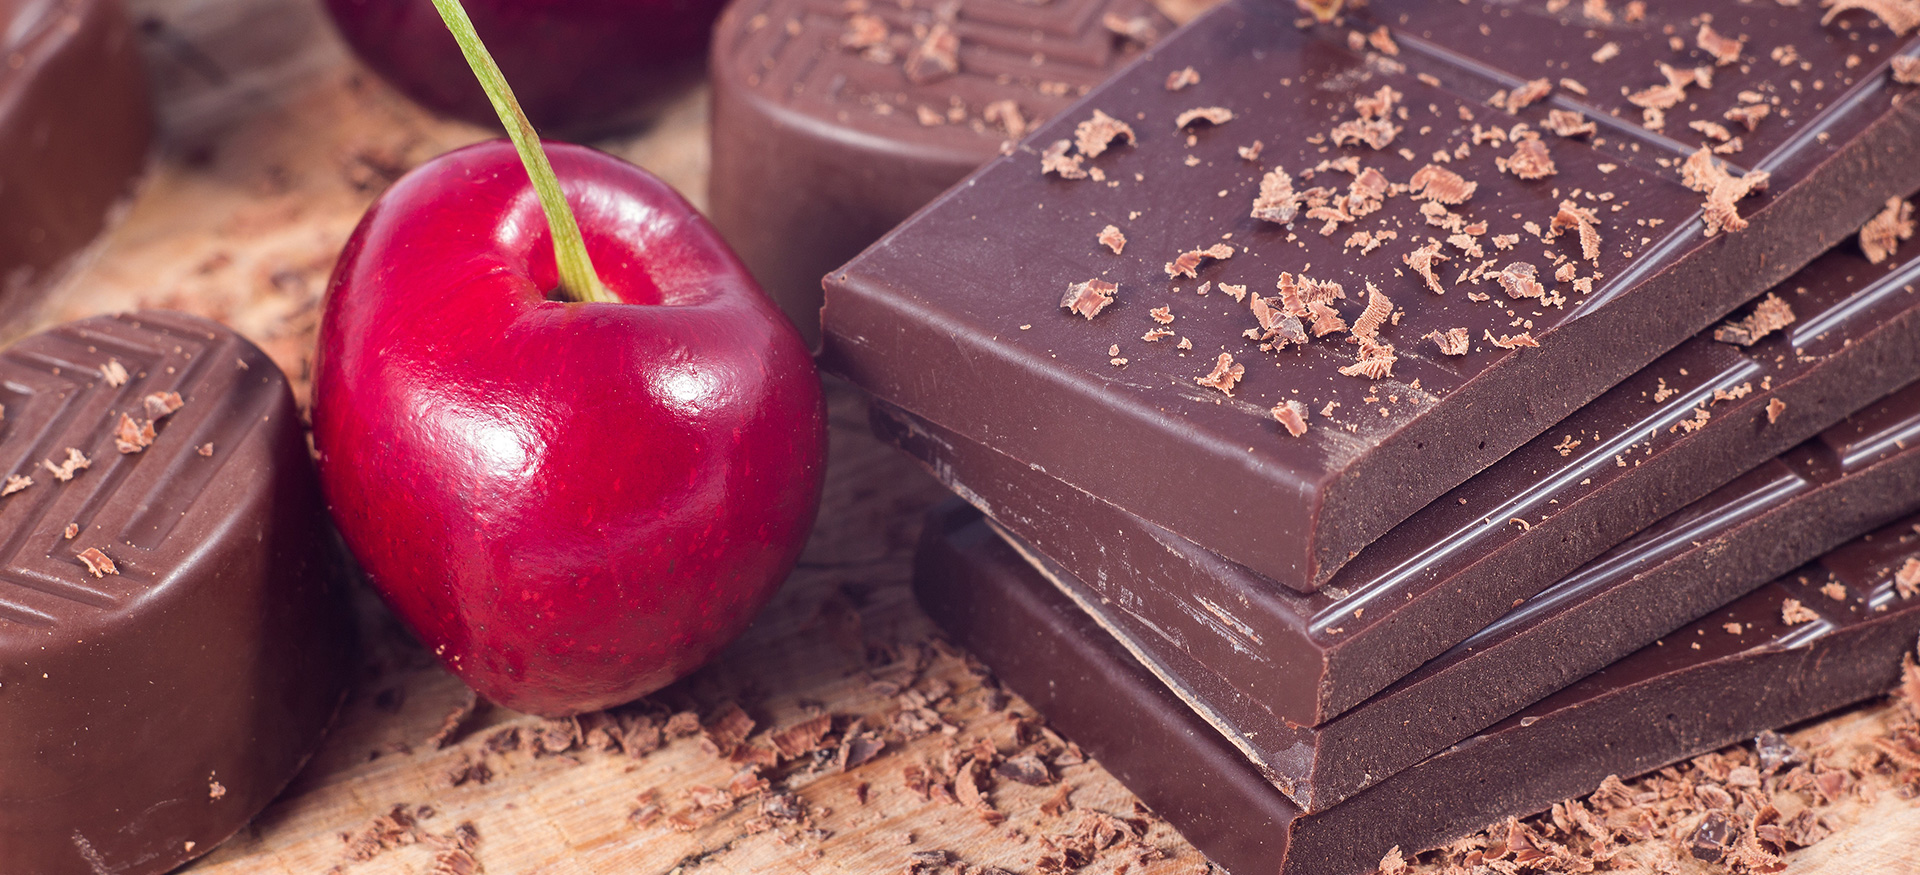 Ever Thought You Could Use Chocolate & Cherry To Remove Sun Tan?